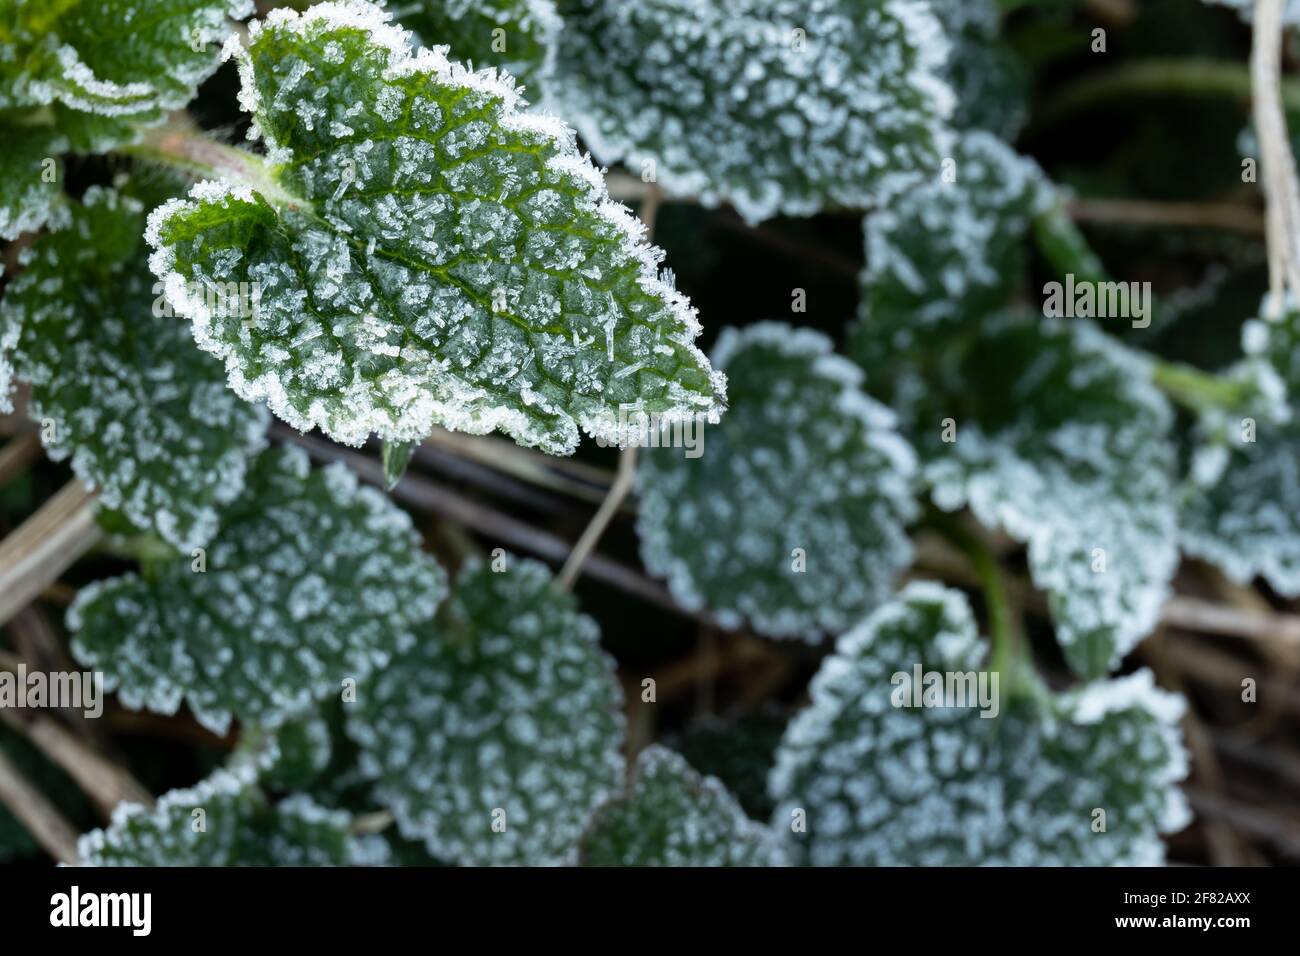 Plants with frozen frost. Beautiful abstract frozen microcosmos pattern. Freezing weather frost action in nature. Floral backdrop. Stock Photo